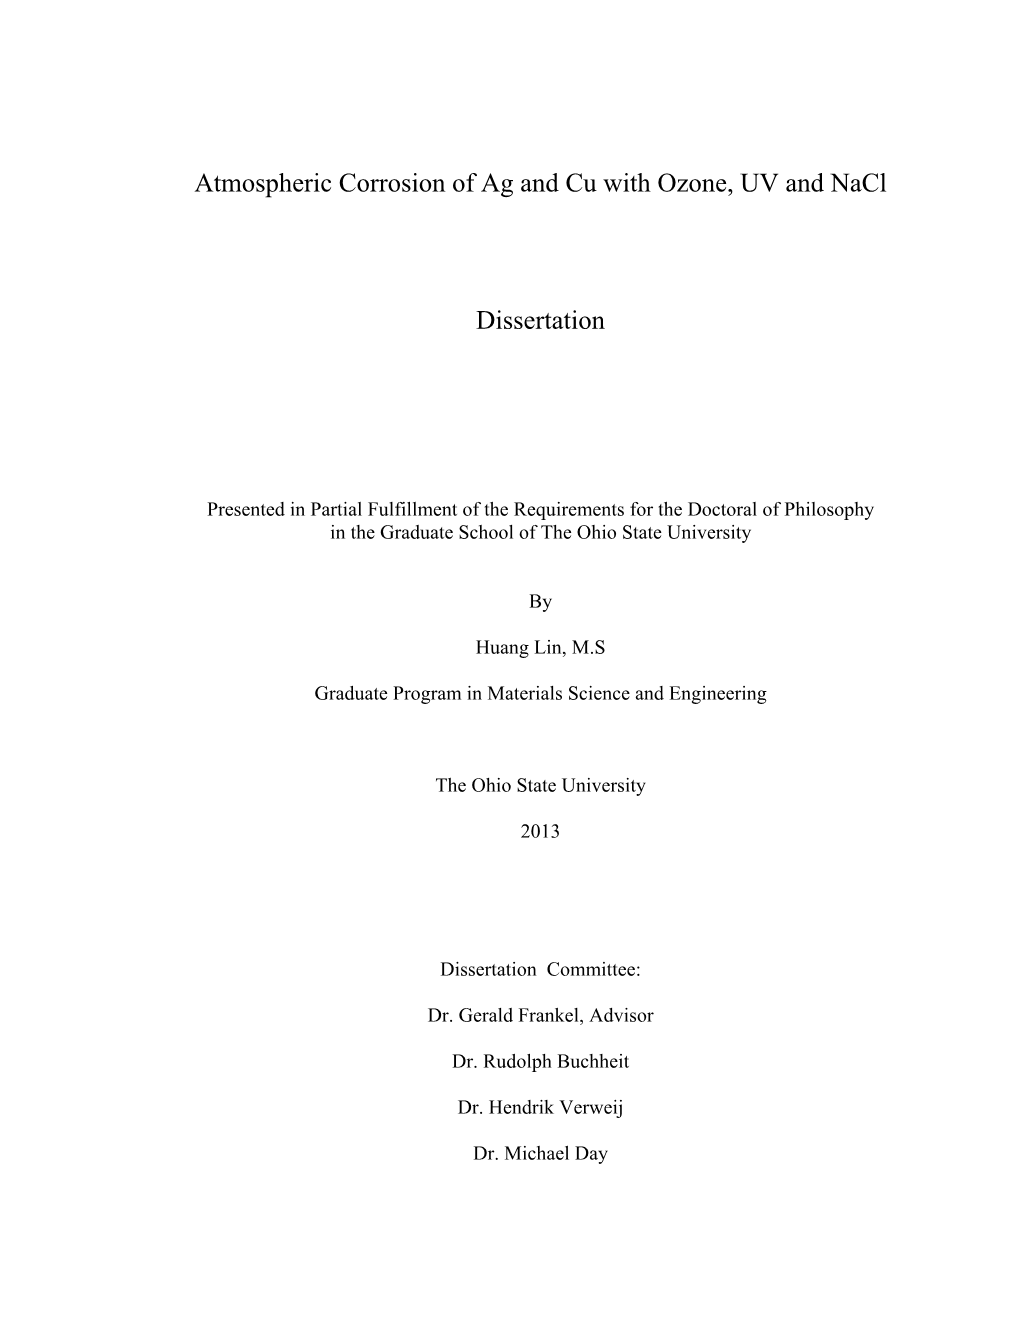 Atmospheric Corrosion of Ag and Cu with Ozone, UV and Nacl Dissertation